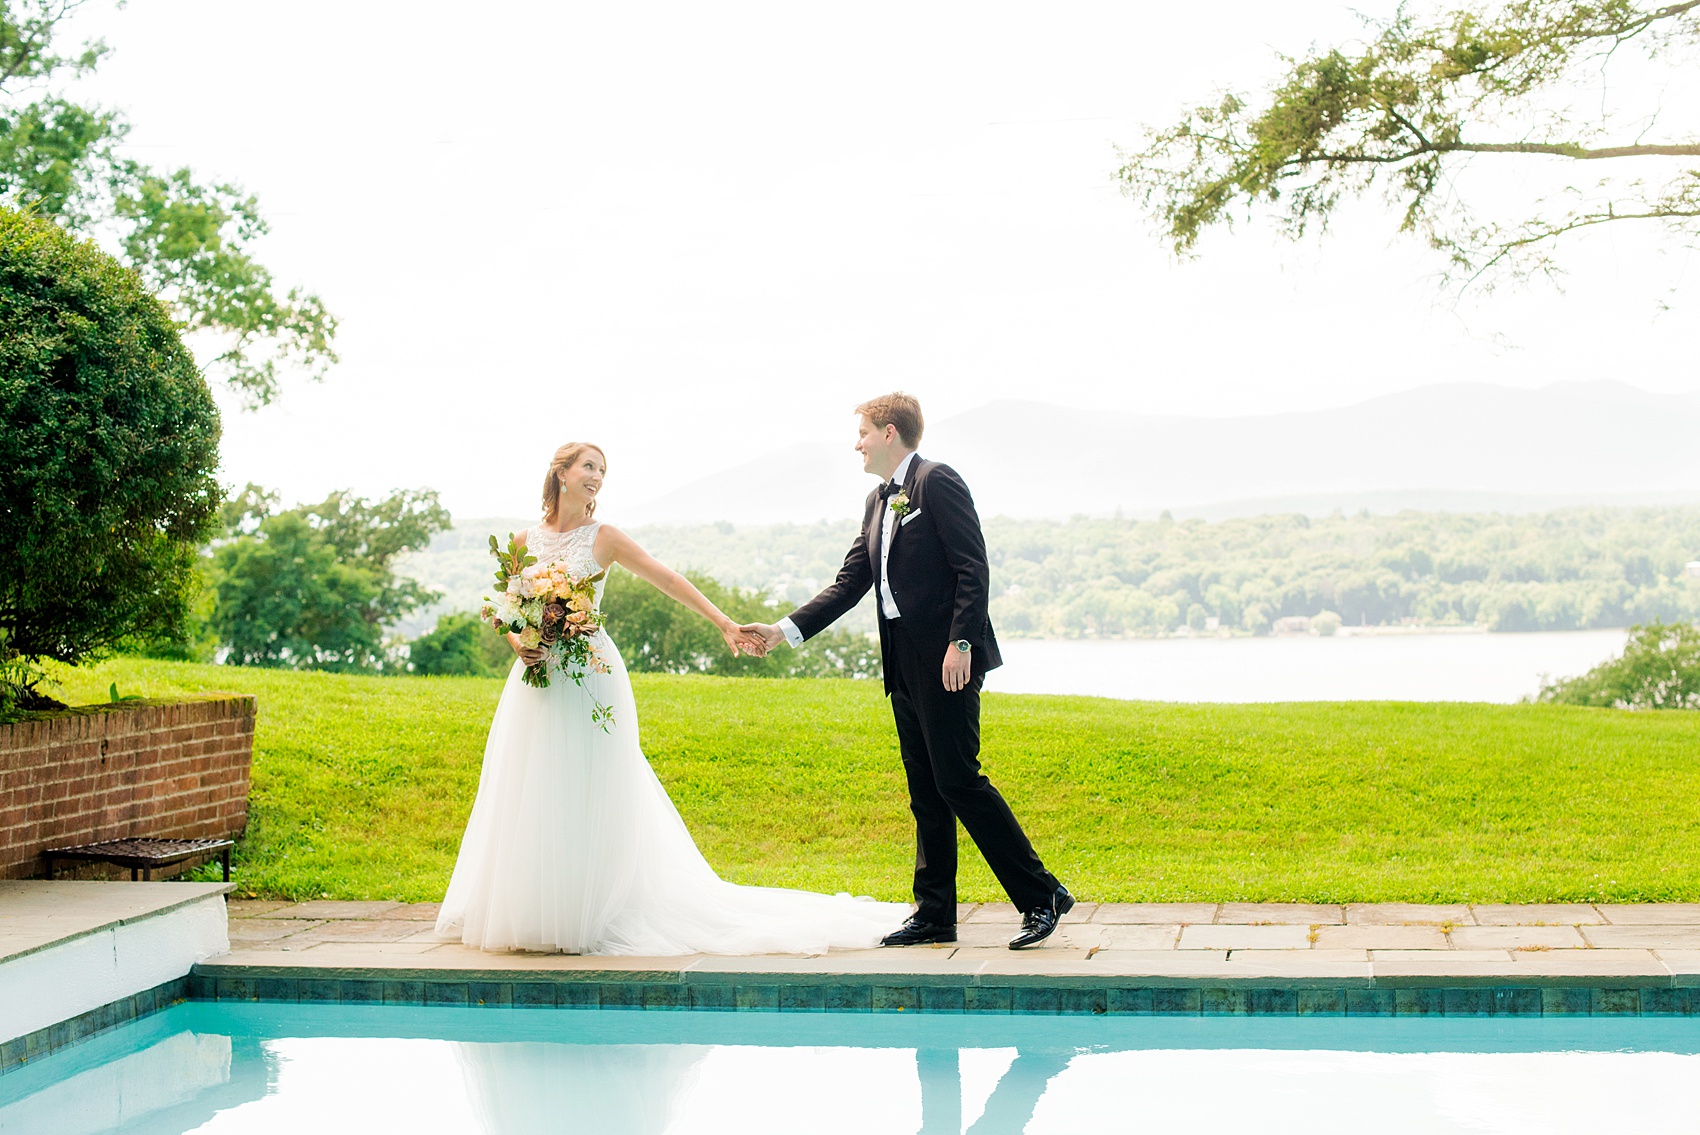 Mikkel Paige Photography photos from a Southwood Estate Wedding in Germantown, New York in the Hudson Valley. Picture of the bride and groom by the pool on the historic property.